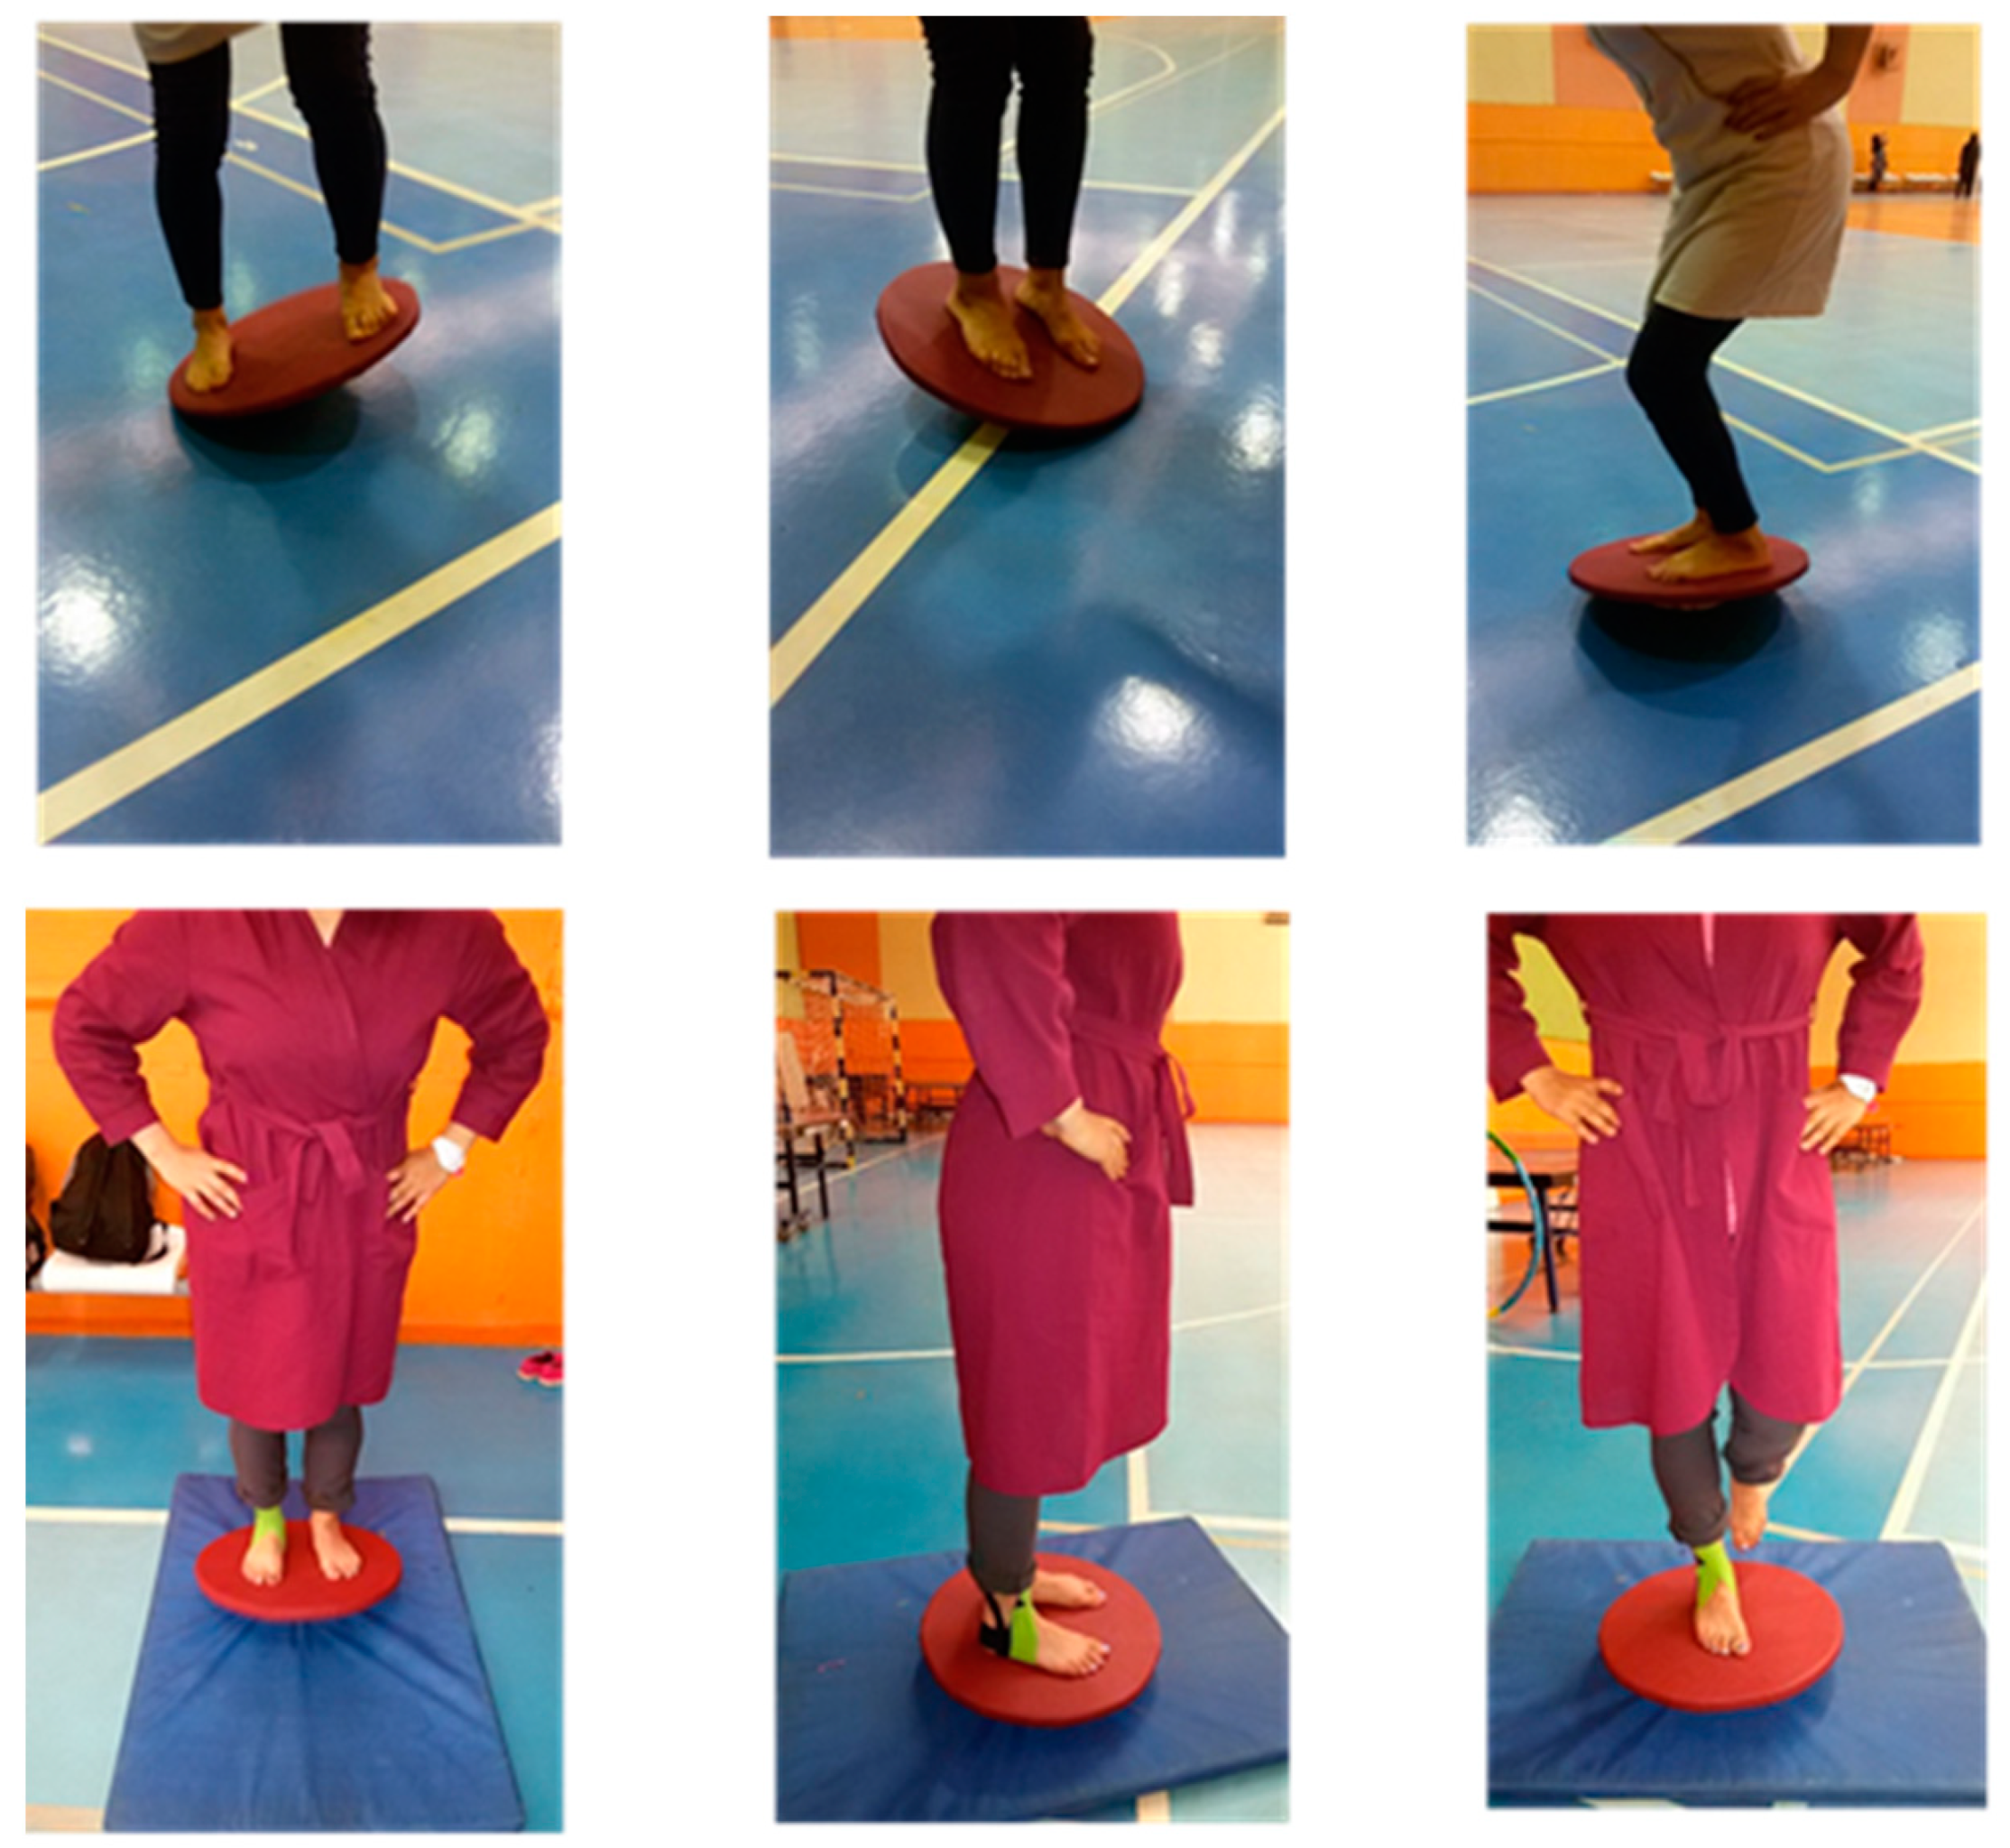 Ankle Stability Exercises for Advanced Athletes 